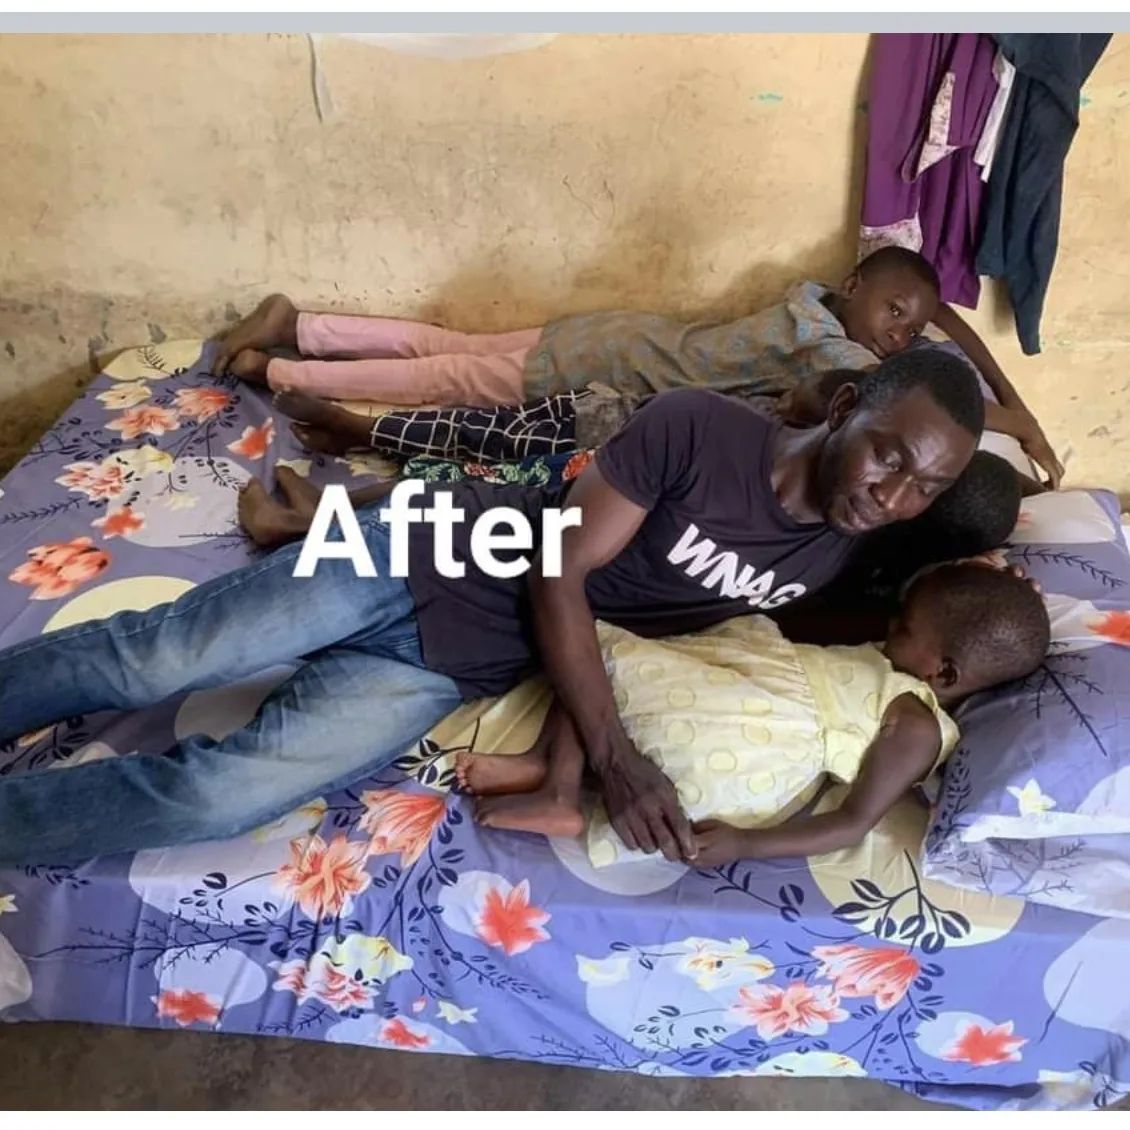 Good Samaritan provides mattress for single father who sleeps on bare floor with his kids - 321937210 683882089960733 4438672844755631282 n